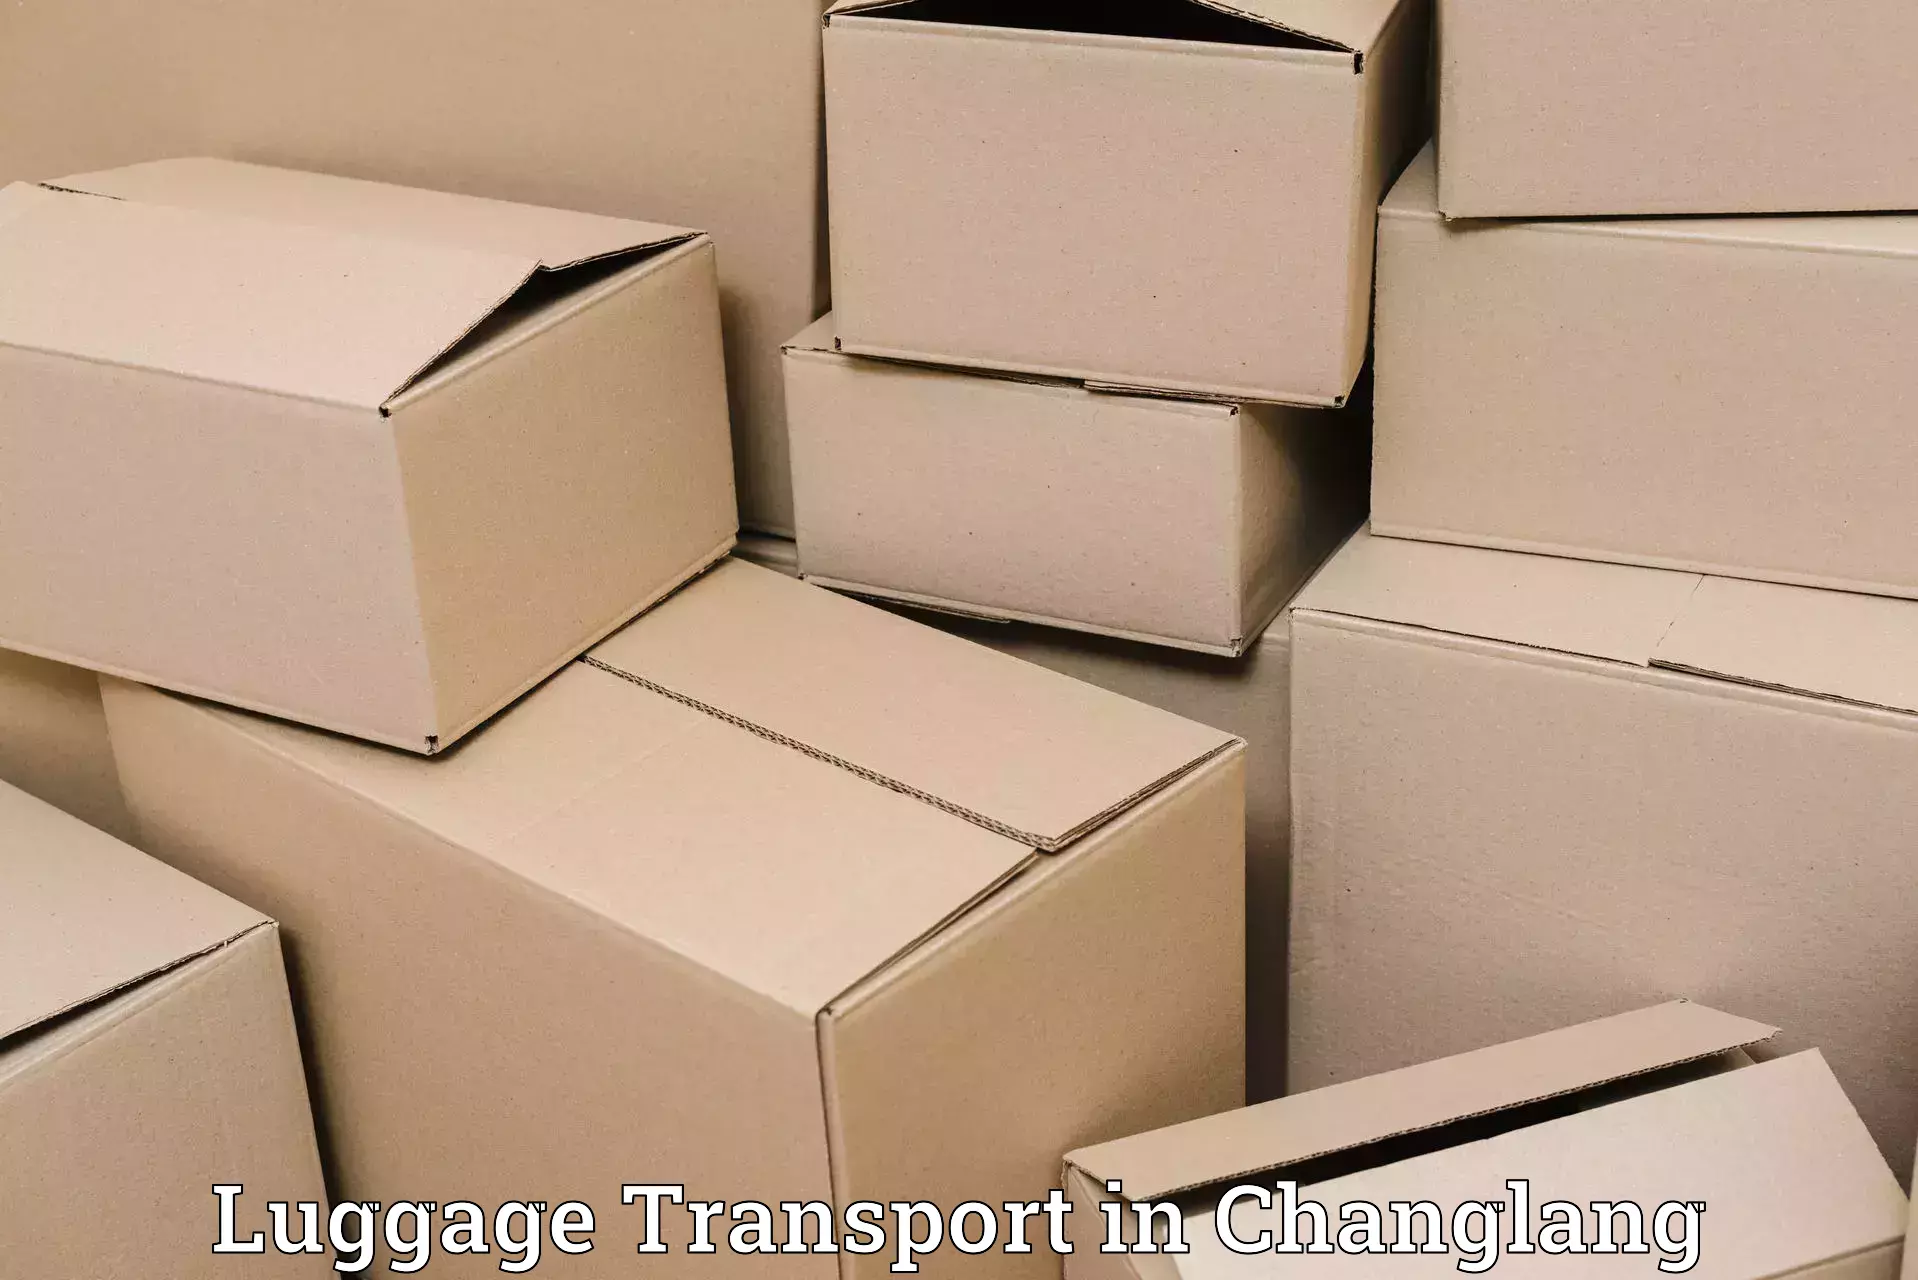 Luggage transfer service in Changlang